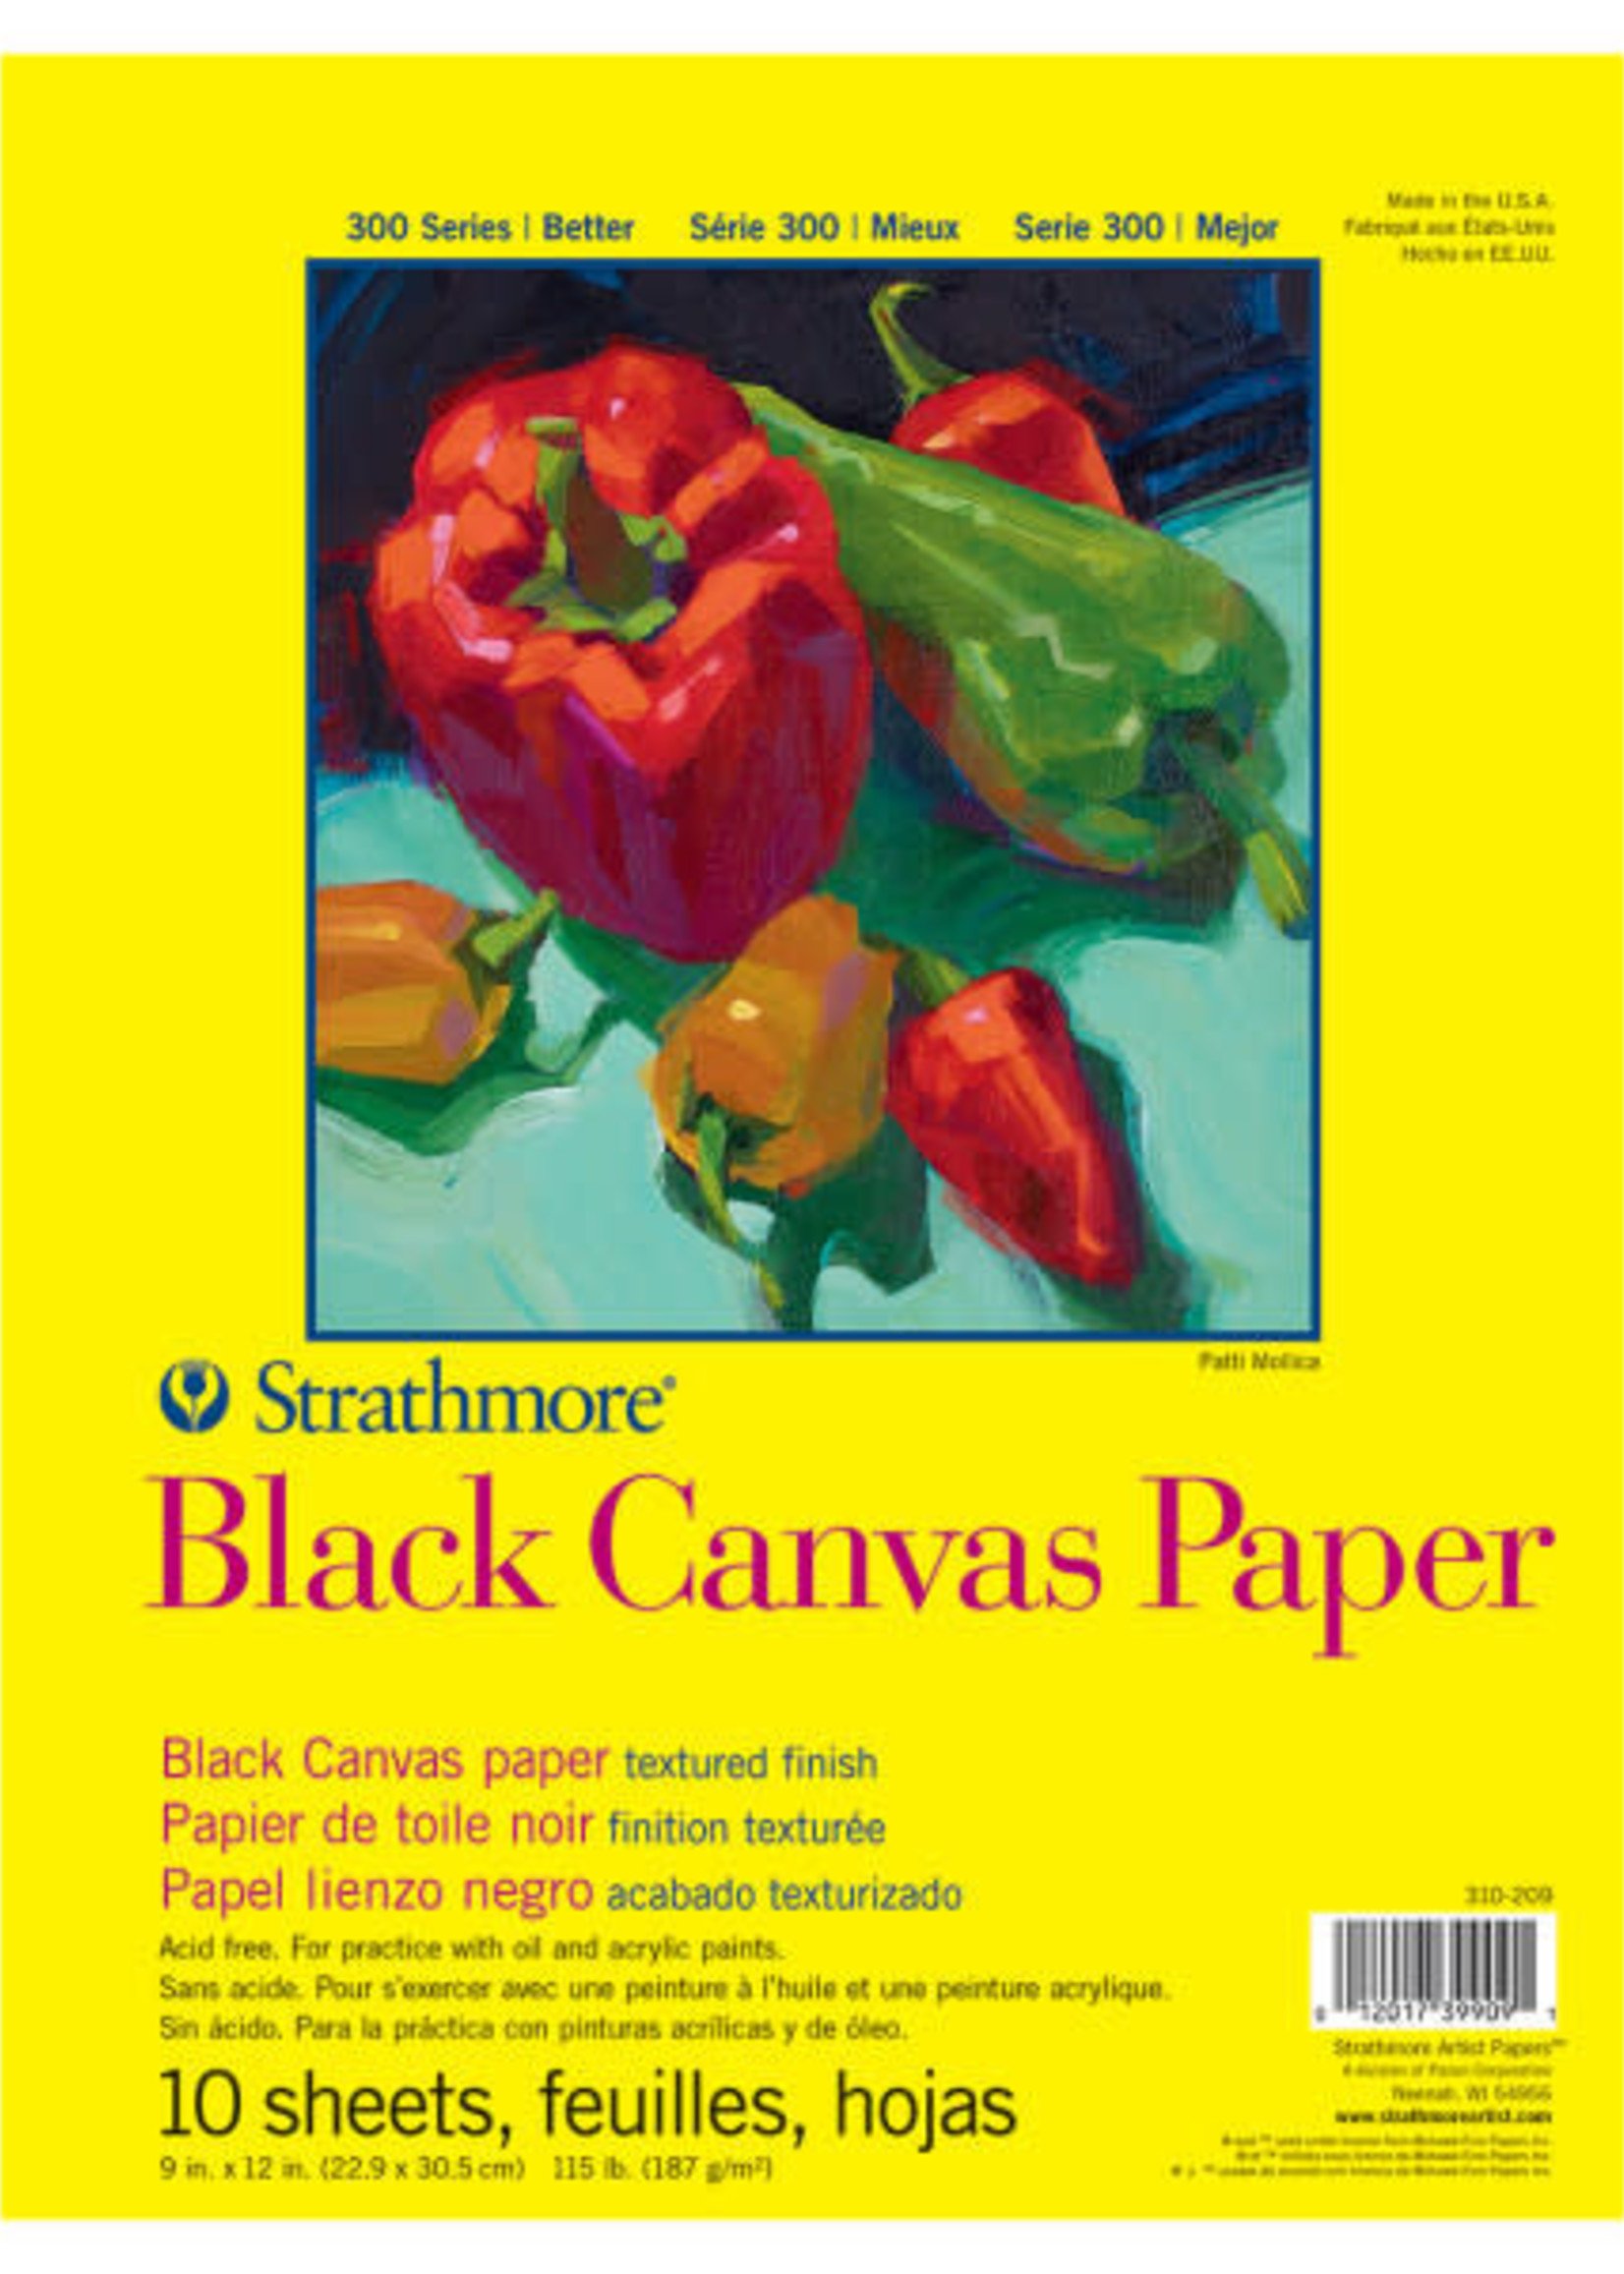 PACON/STRATHMORE BLACK CANVAS PAPER PAD 300 SERIES 10 SHEETS 9X12